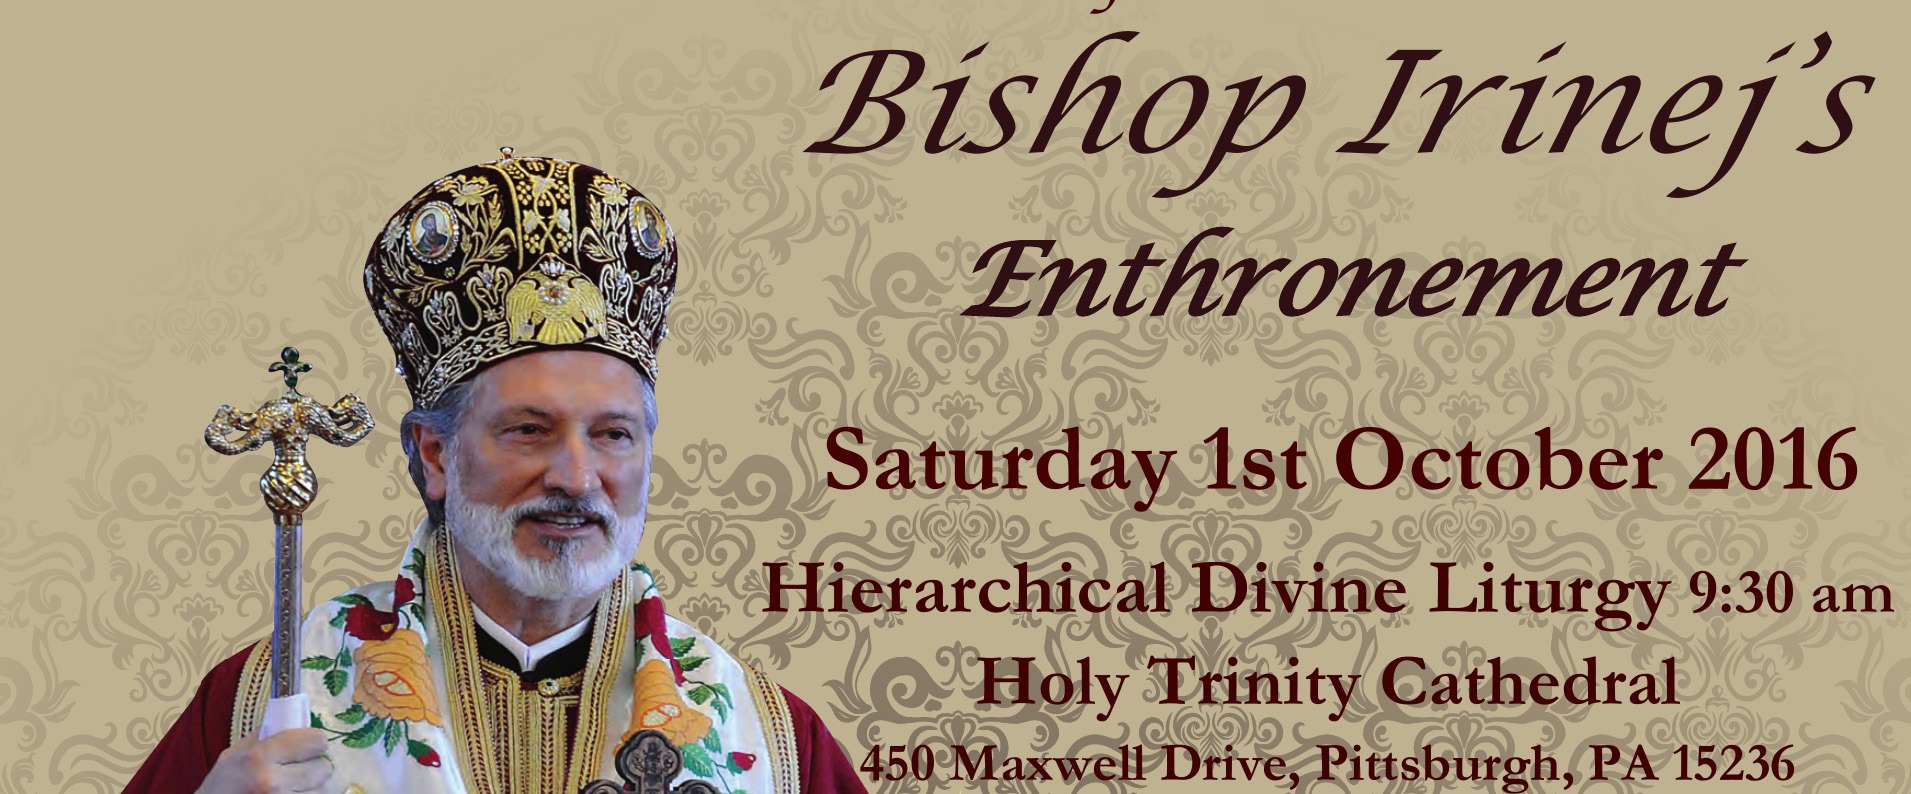 His Grace Bishop Irinej’s Enthronement in Pittsburgh, PA –  October 1, 2016